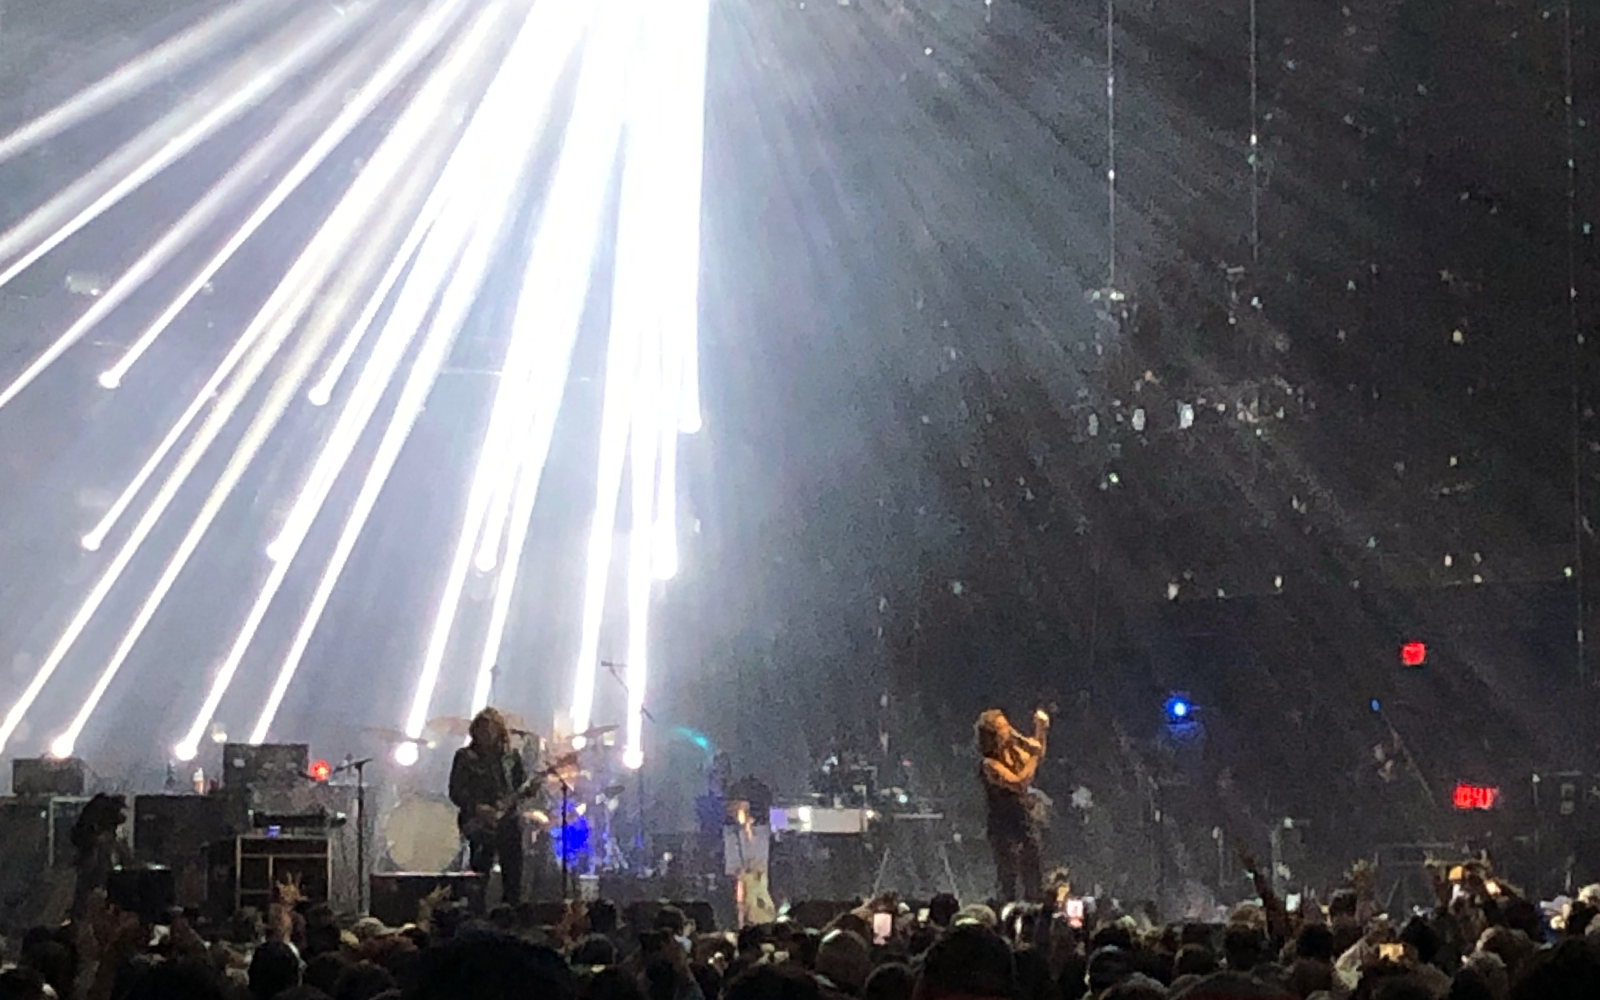 My Morning Jacket on stage in Boston